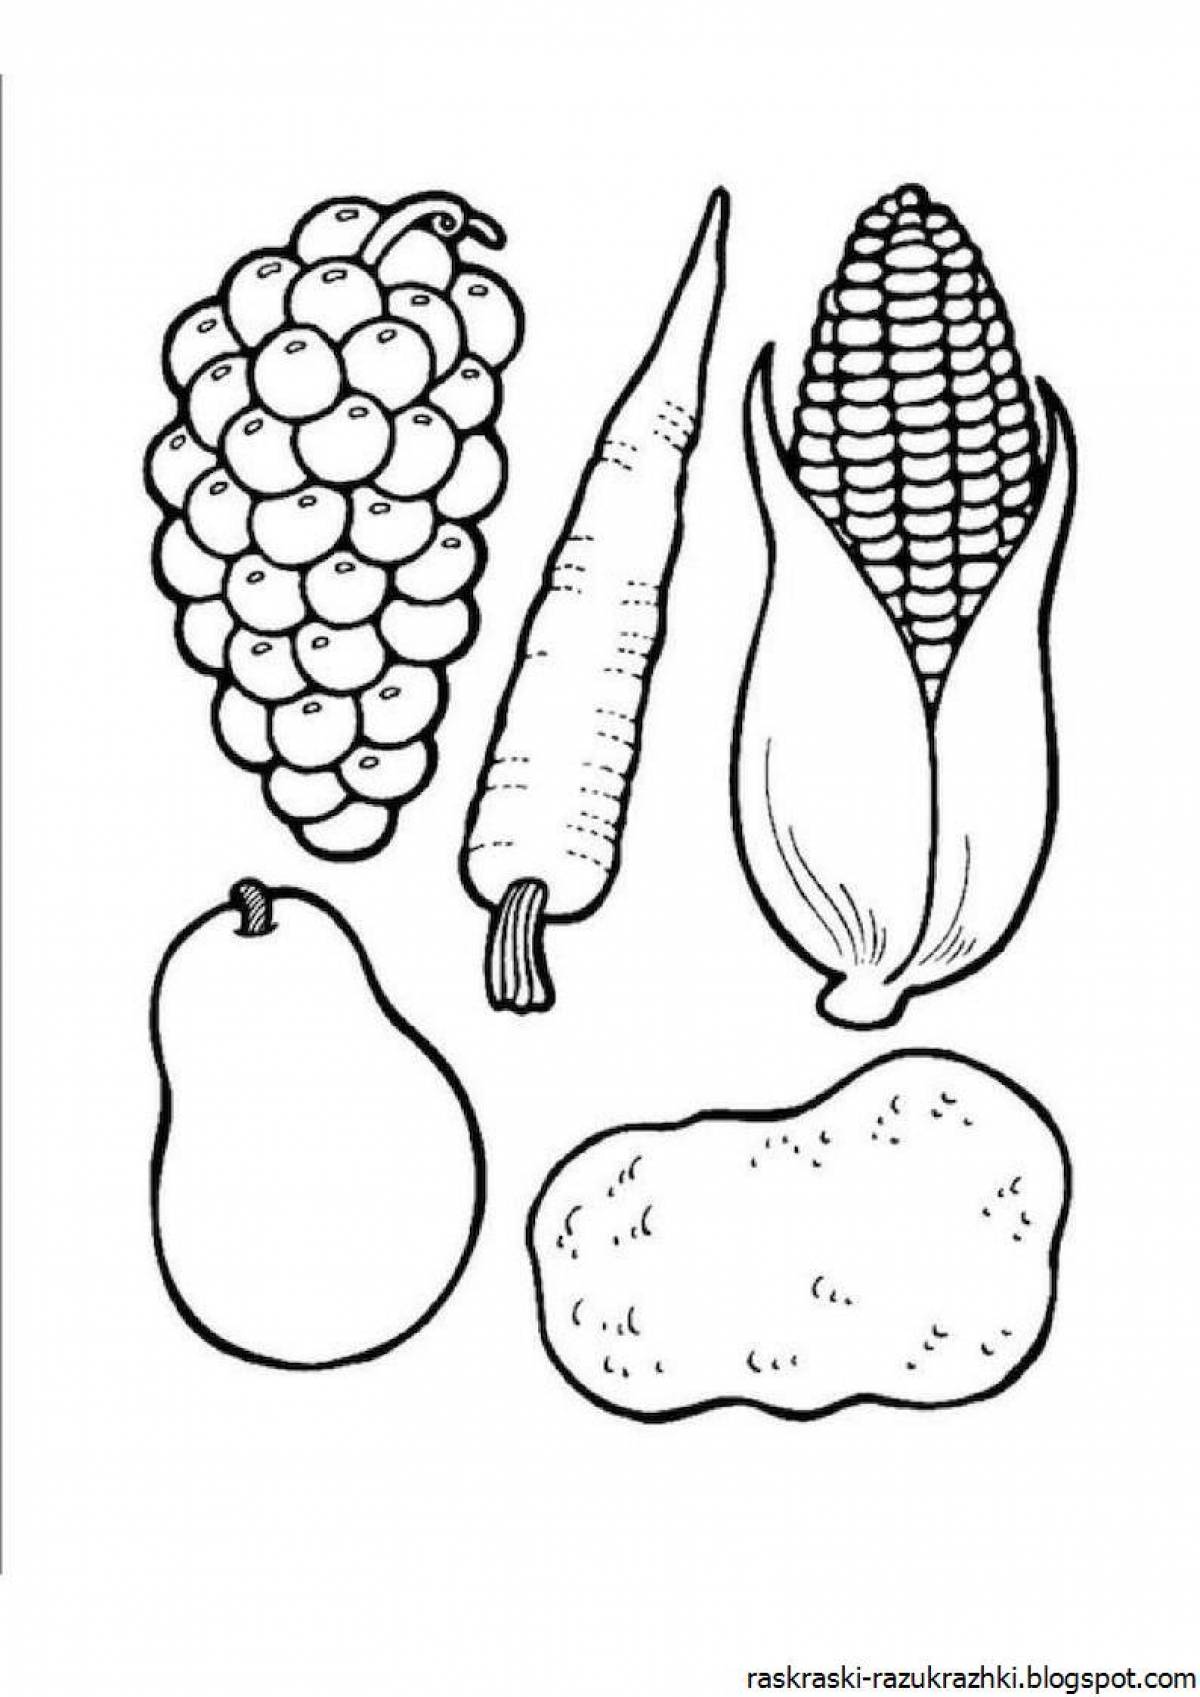 Thoughtful coloring of fruits and vegetables